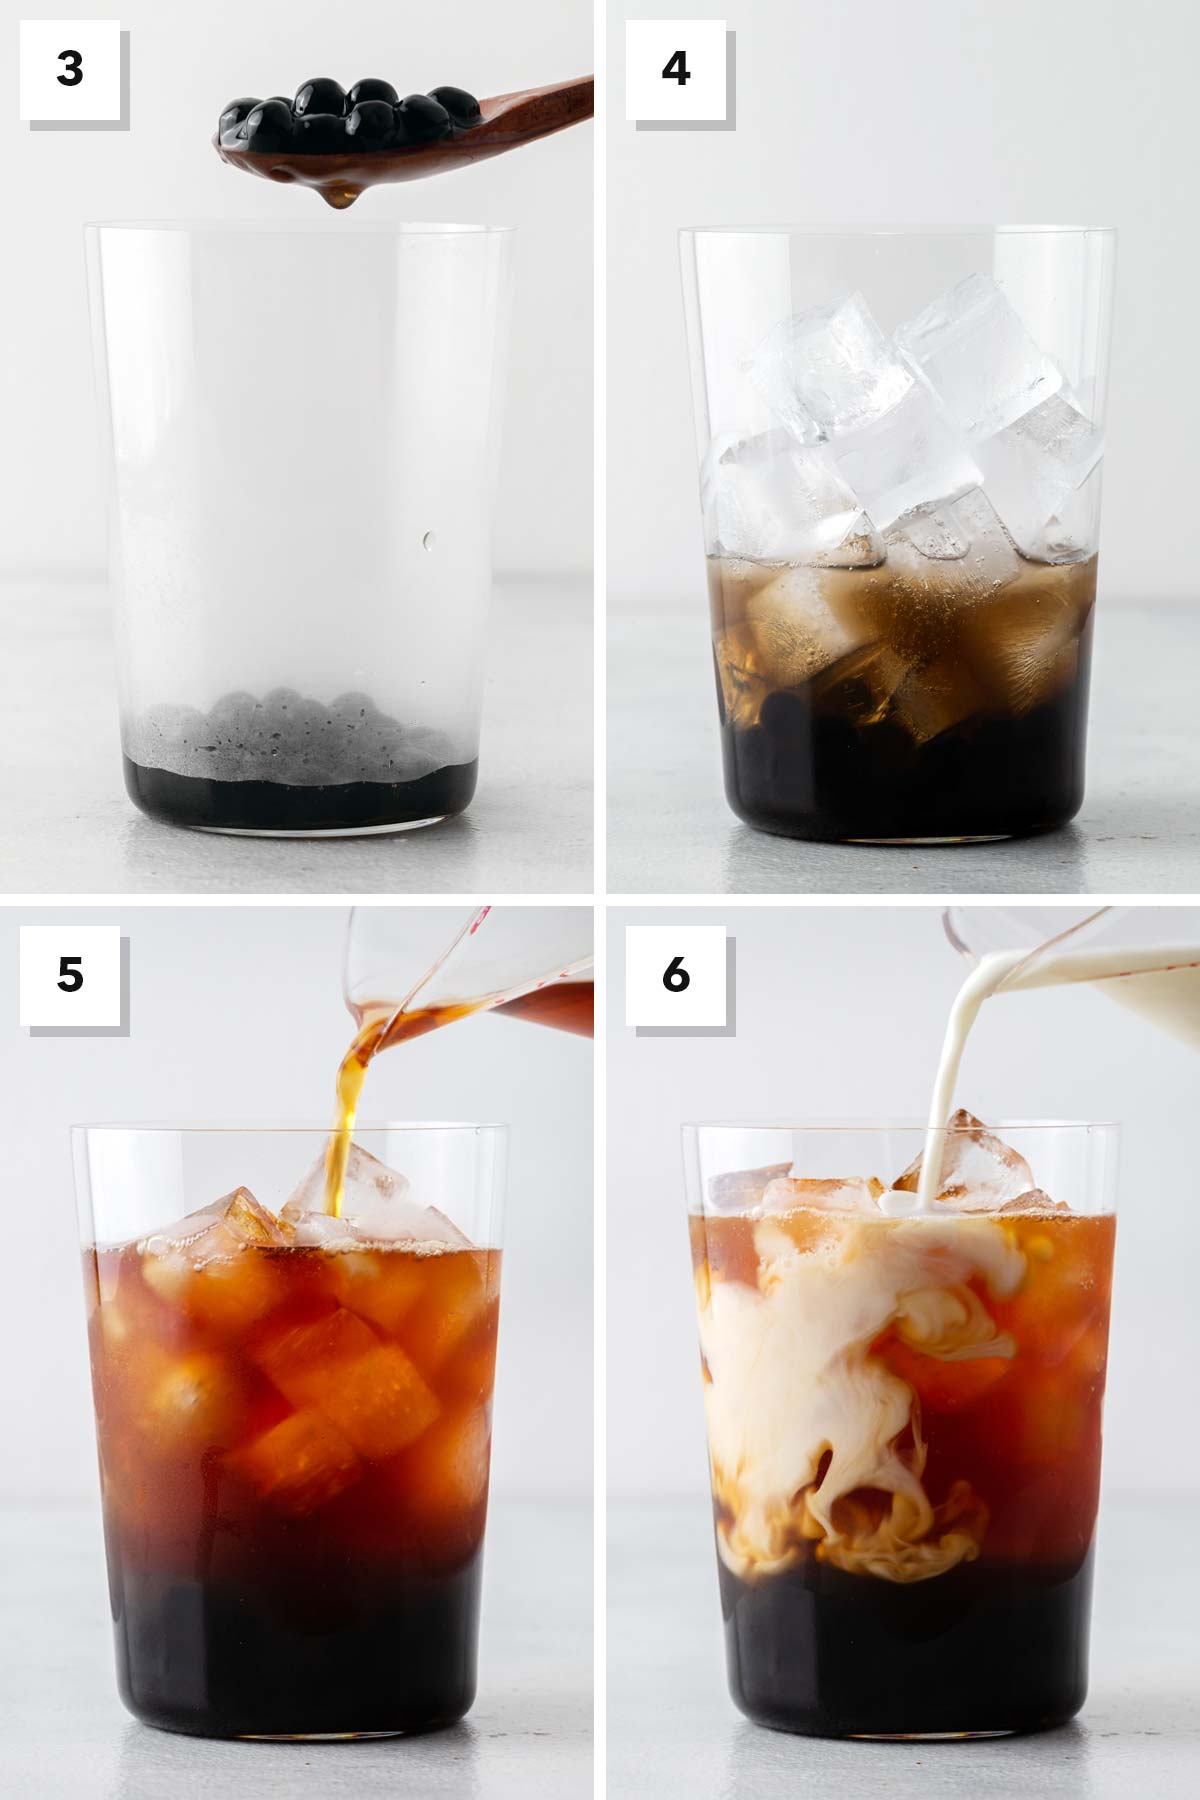 Rose Bubble Tea (Rose Milk Tea with Boba) steps 3 through 6 in the step-by-step directions.